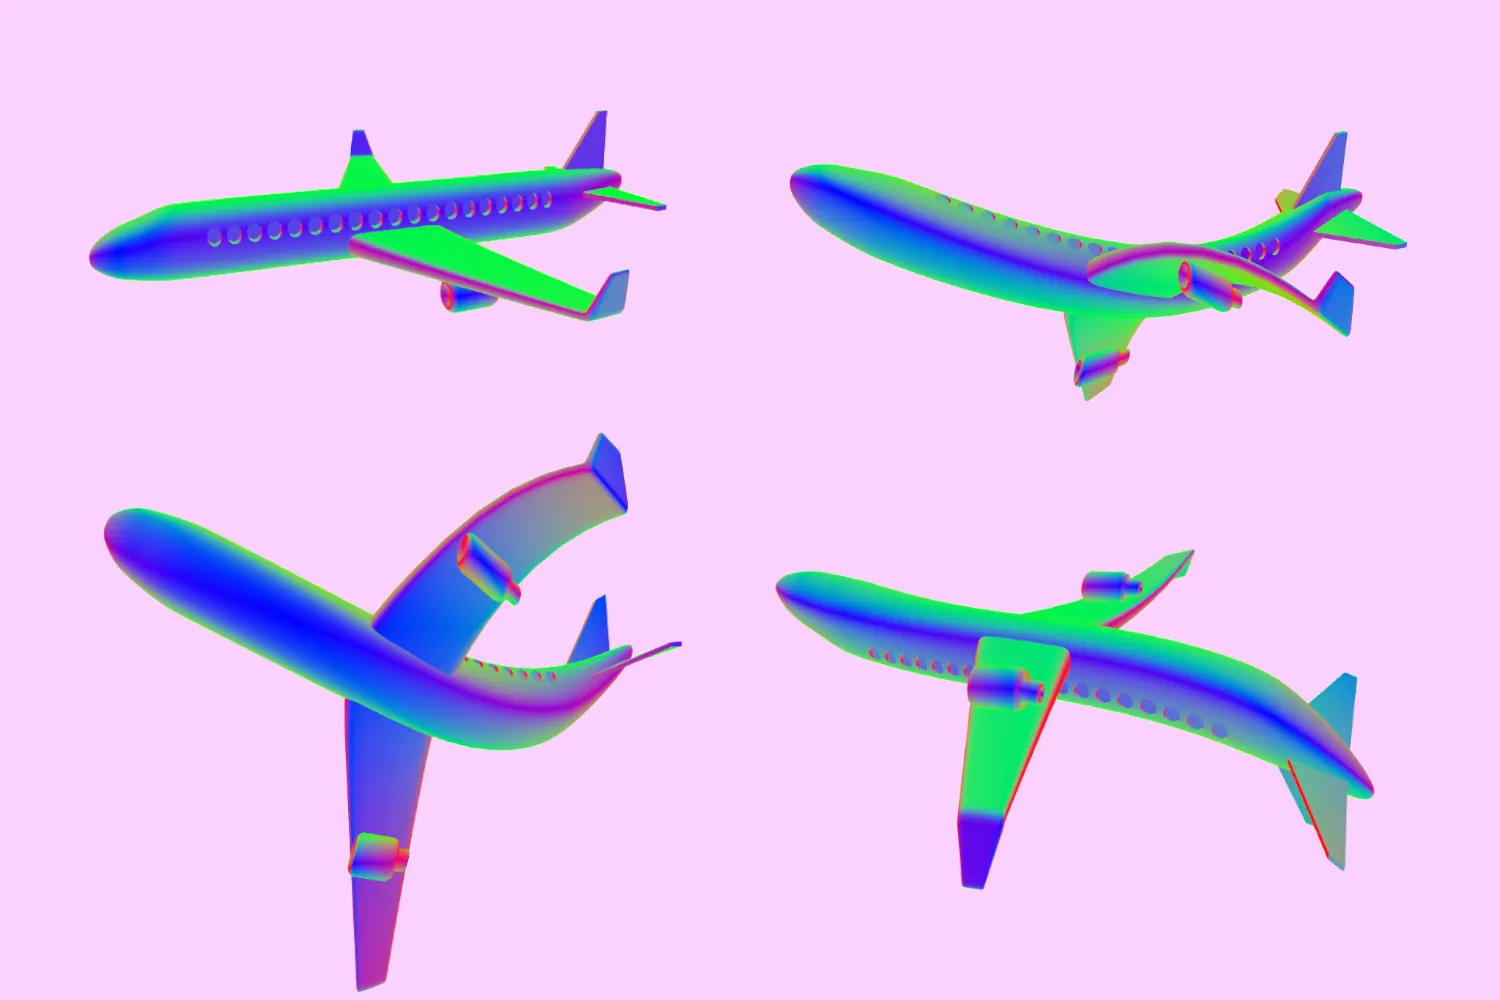 Four images of a 3D airplane twisting upside-down